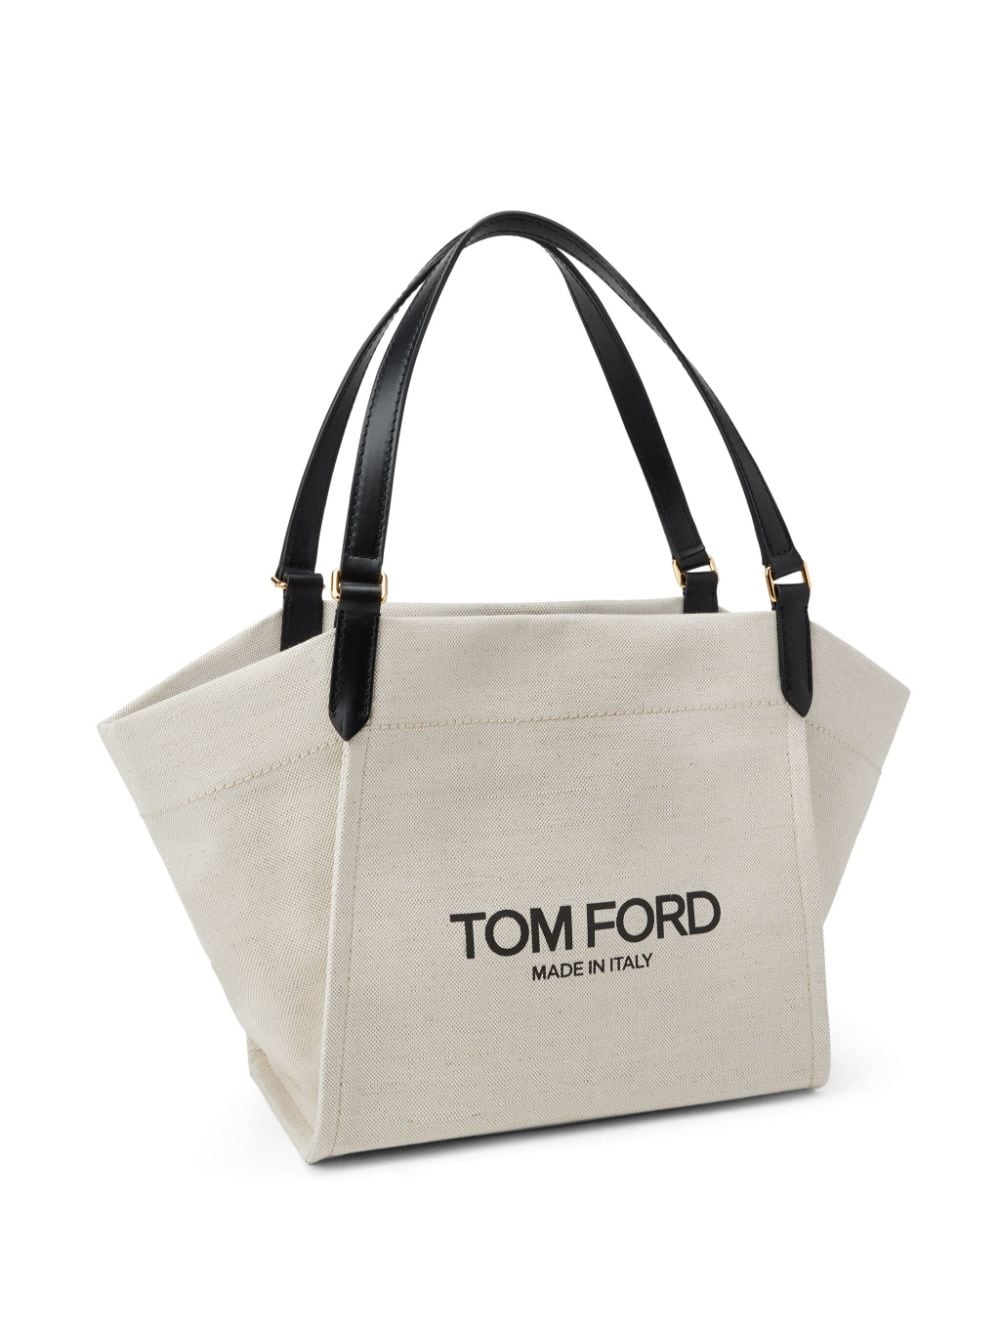 TOM FORD Chic Tan Canvas and Leather Medium Tote with Logo Print and Gold-Tone Accents